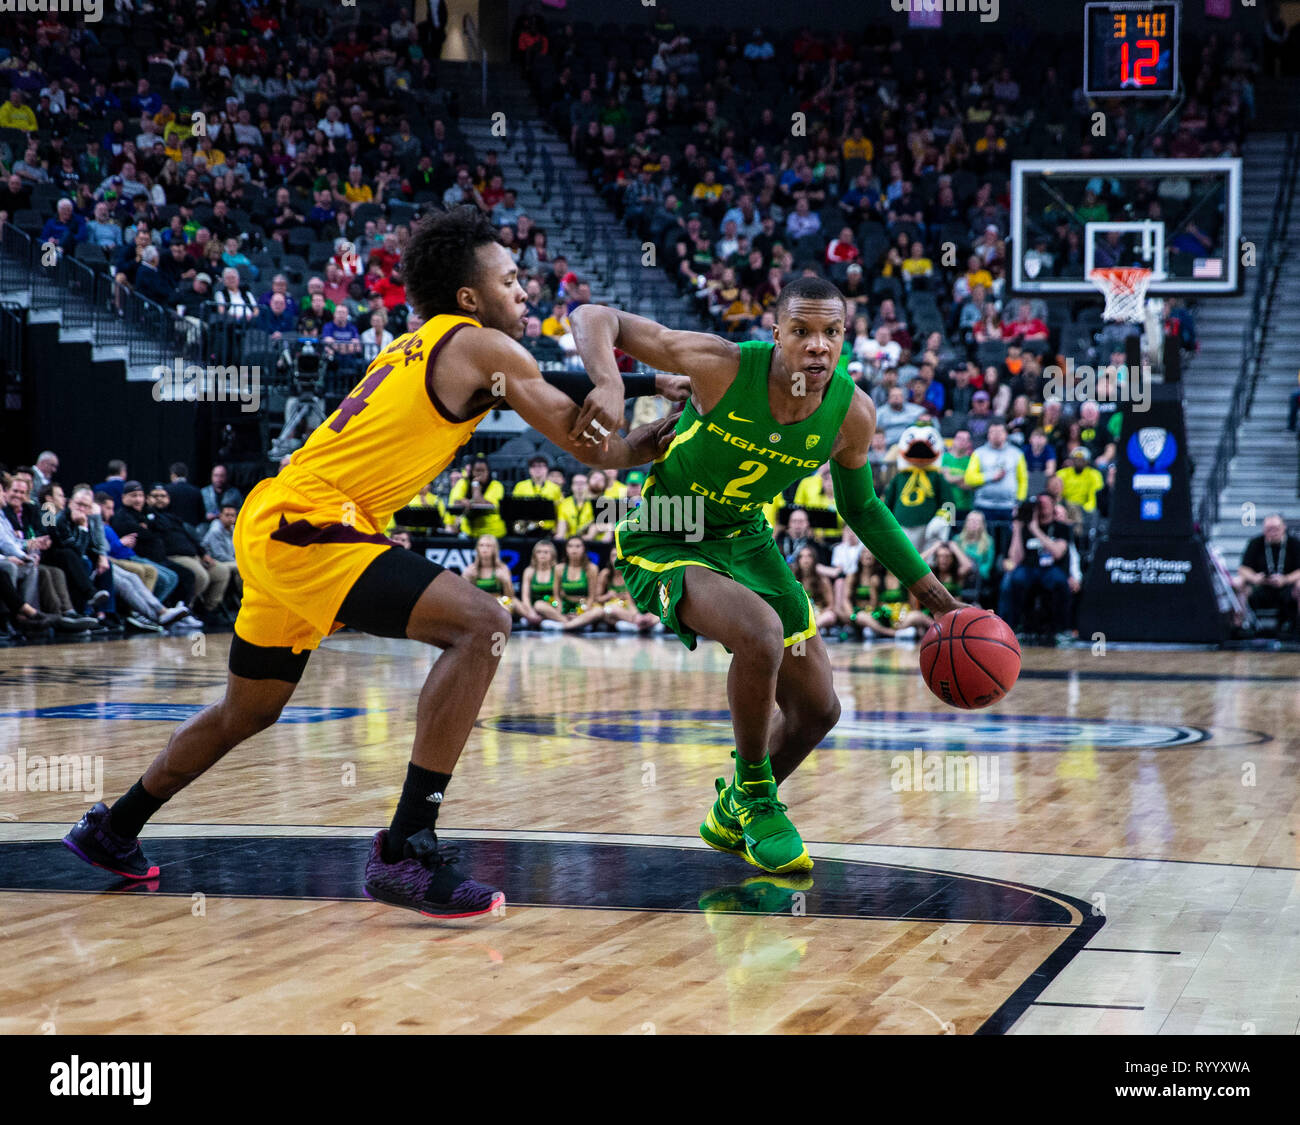 Las Vegas, NV, USA. 15th Mar, 2019. A. Oregon forward Louis King (2) drives to the hoop during the NCAA Pac 12 Men's Basketball tournament semi-final between the Oregon Ducks and the Arizona State Sun Devils 79-75 win at T Mobile Arena Las Vegas, NV. Thurman James/CSM/Alamy Live News Stock Photo